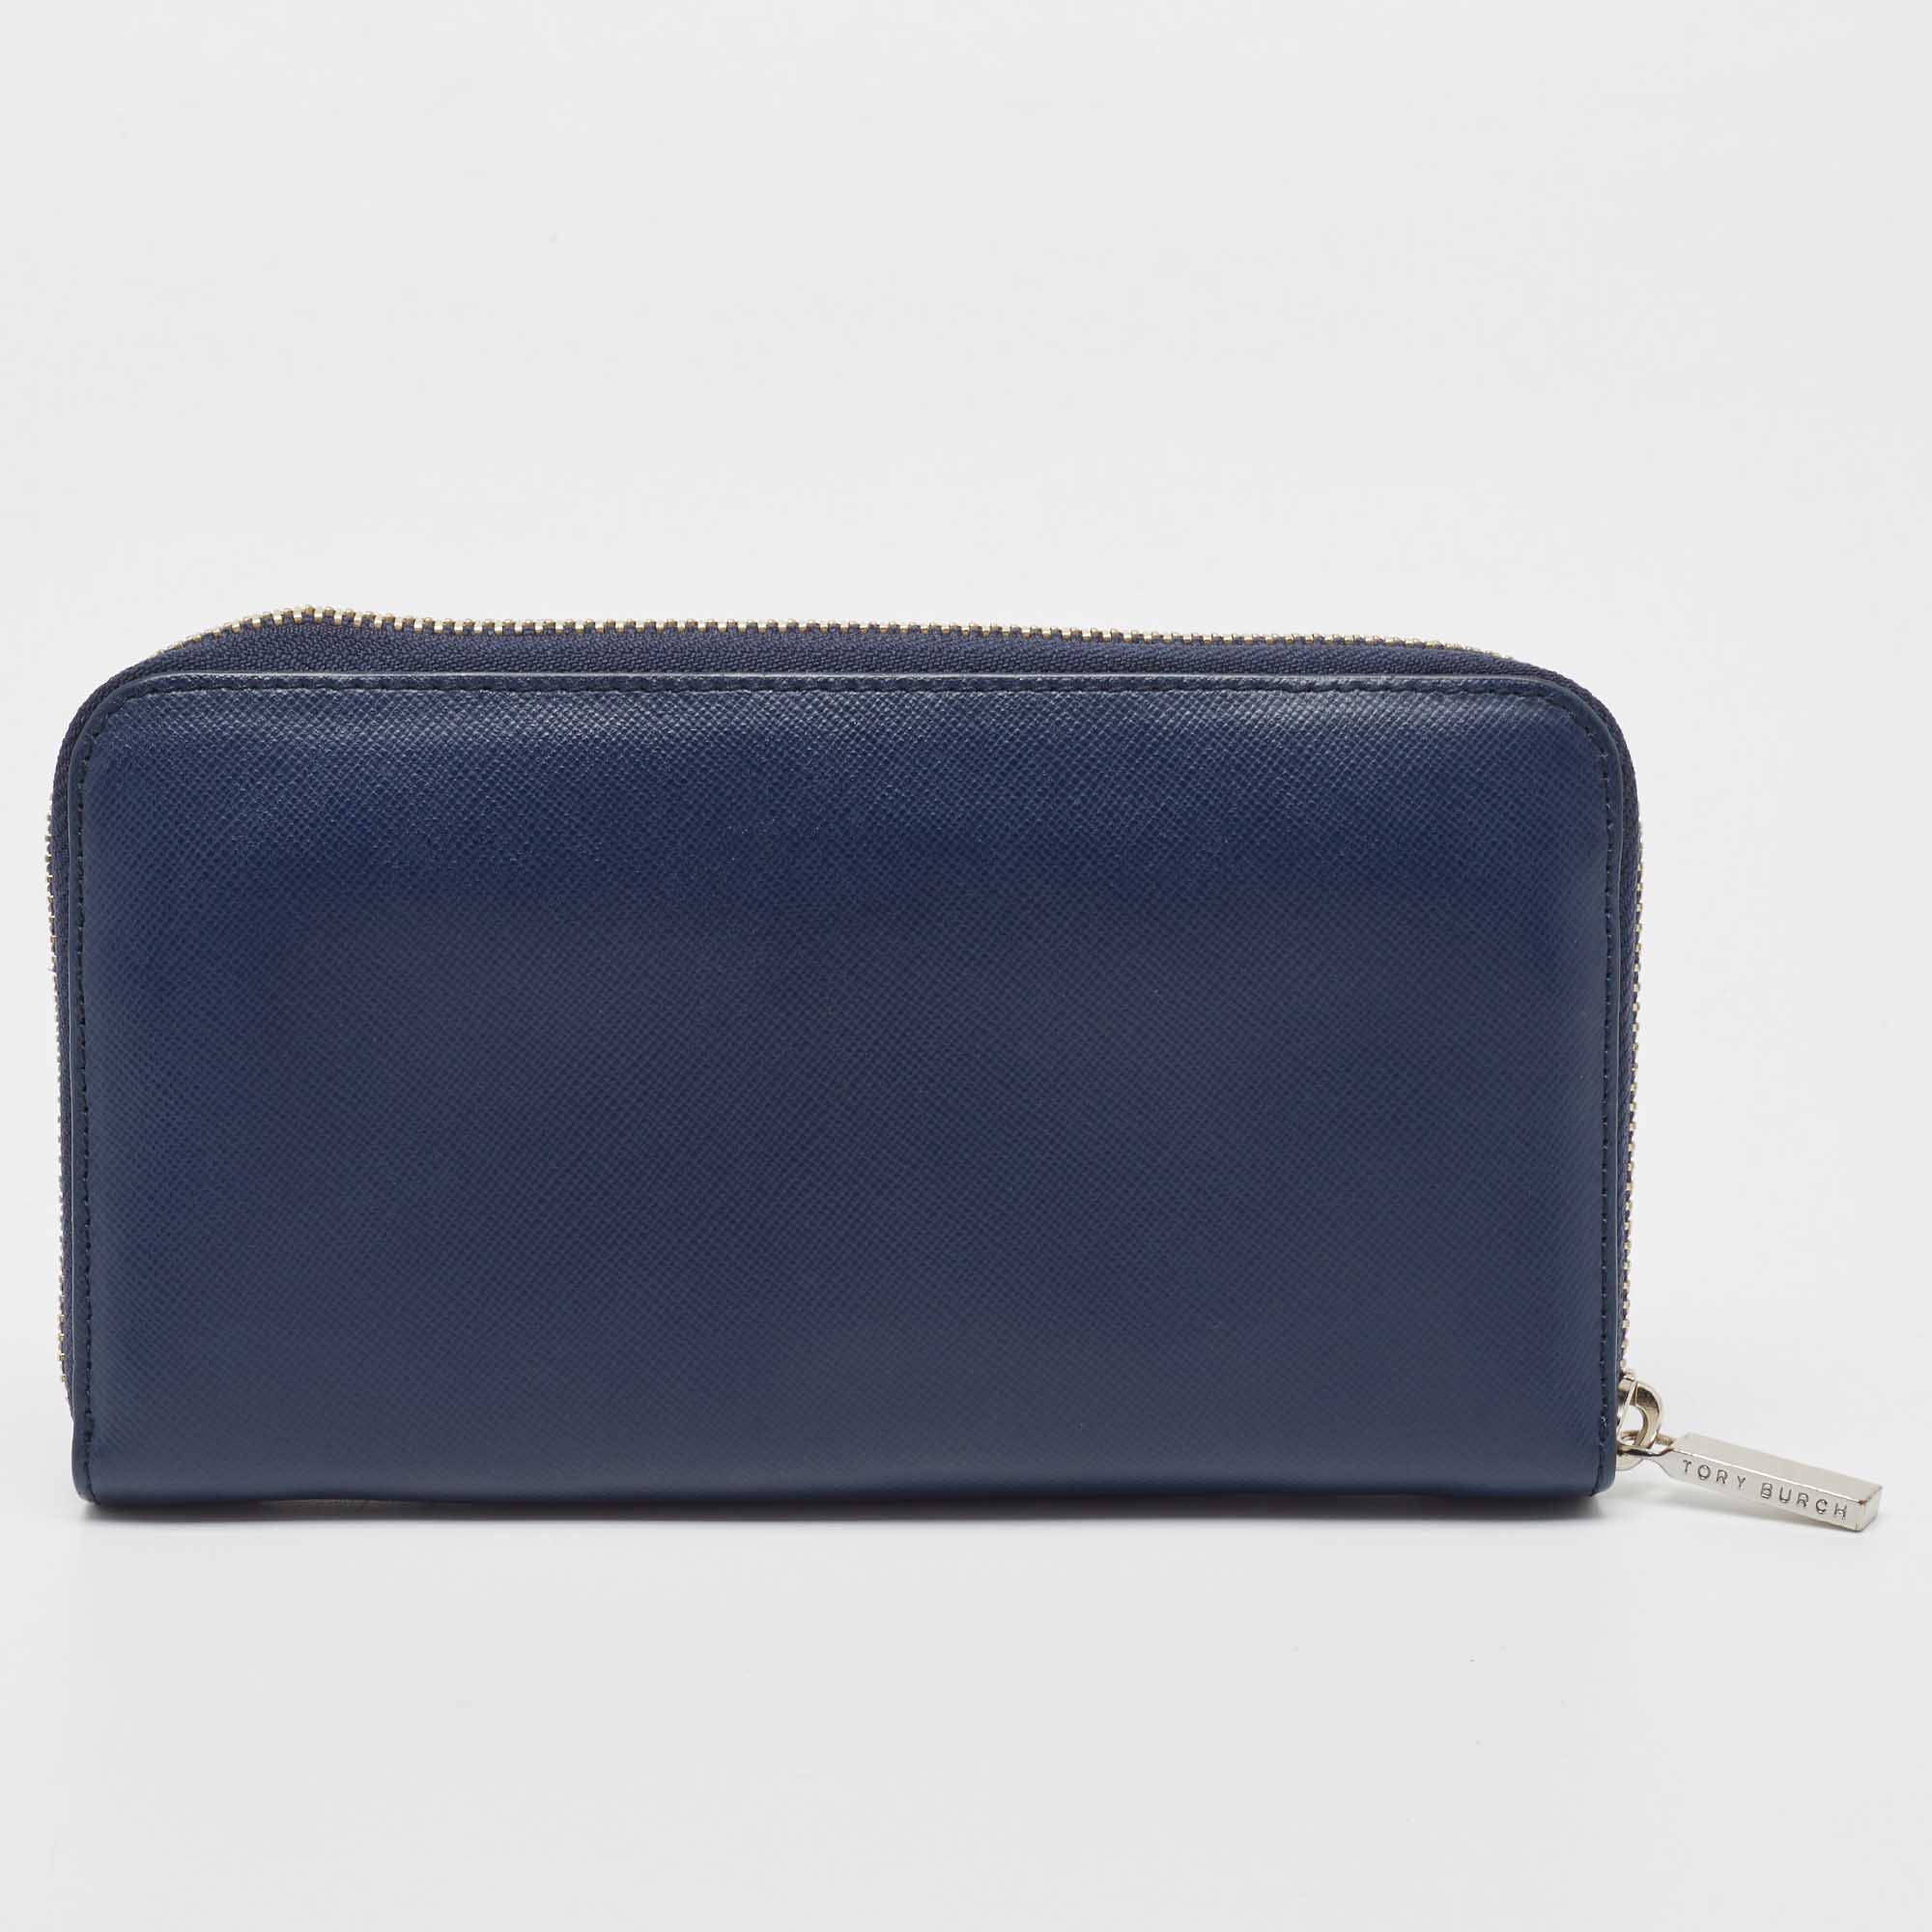 Tory Burch Blue Leather Robinson Zip Around Wallet